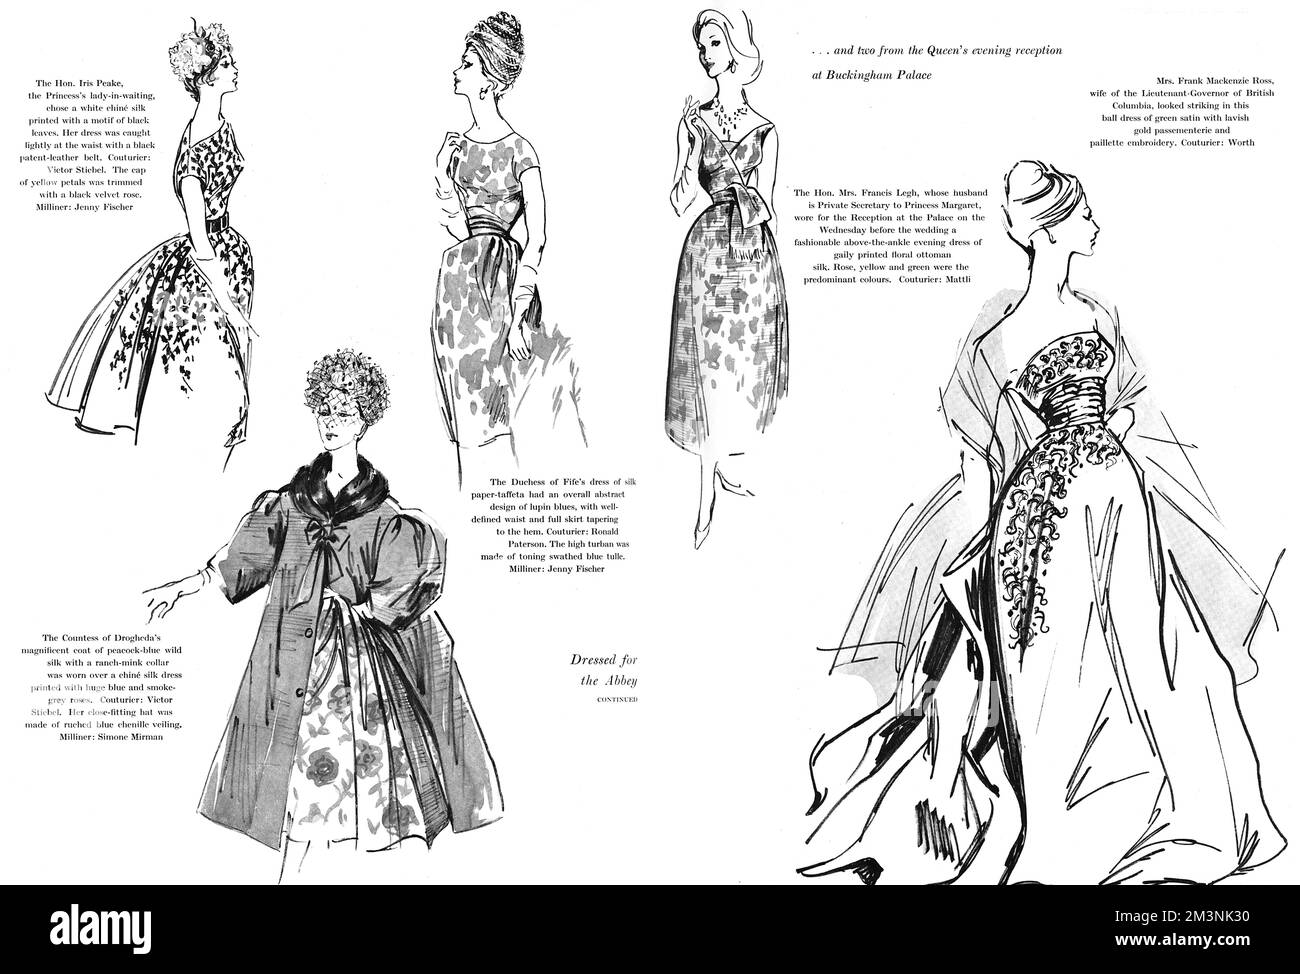 A selection of fashions worn at the wedding and a (pre-wedding evening reception) of Princess Margaret to Anthony Armstrong Jones on 6 May 1960.  From left, the Hon. Iris Peake, the Princess's lady-in-waiting wearing a white chine silk dress printed with a motif of black leaves, caught lightly at the waist with a patent leather belt - by Victor Stiebel.  The cap of yellow petals, trimmed with a black velvet rose is by Jenny Fischer.  Middle left: the Countess of Drogheda in a magnificent coat of peacock blue wild silk with ranch mink collar worn over a chine silk dress printed with huge blue a Stock Photo